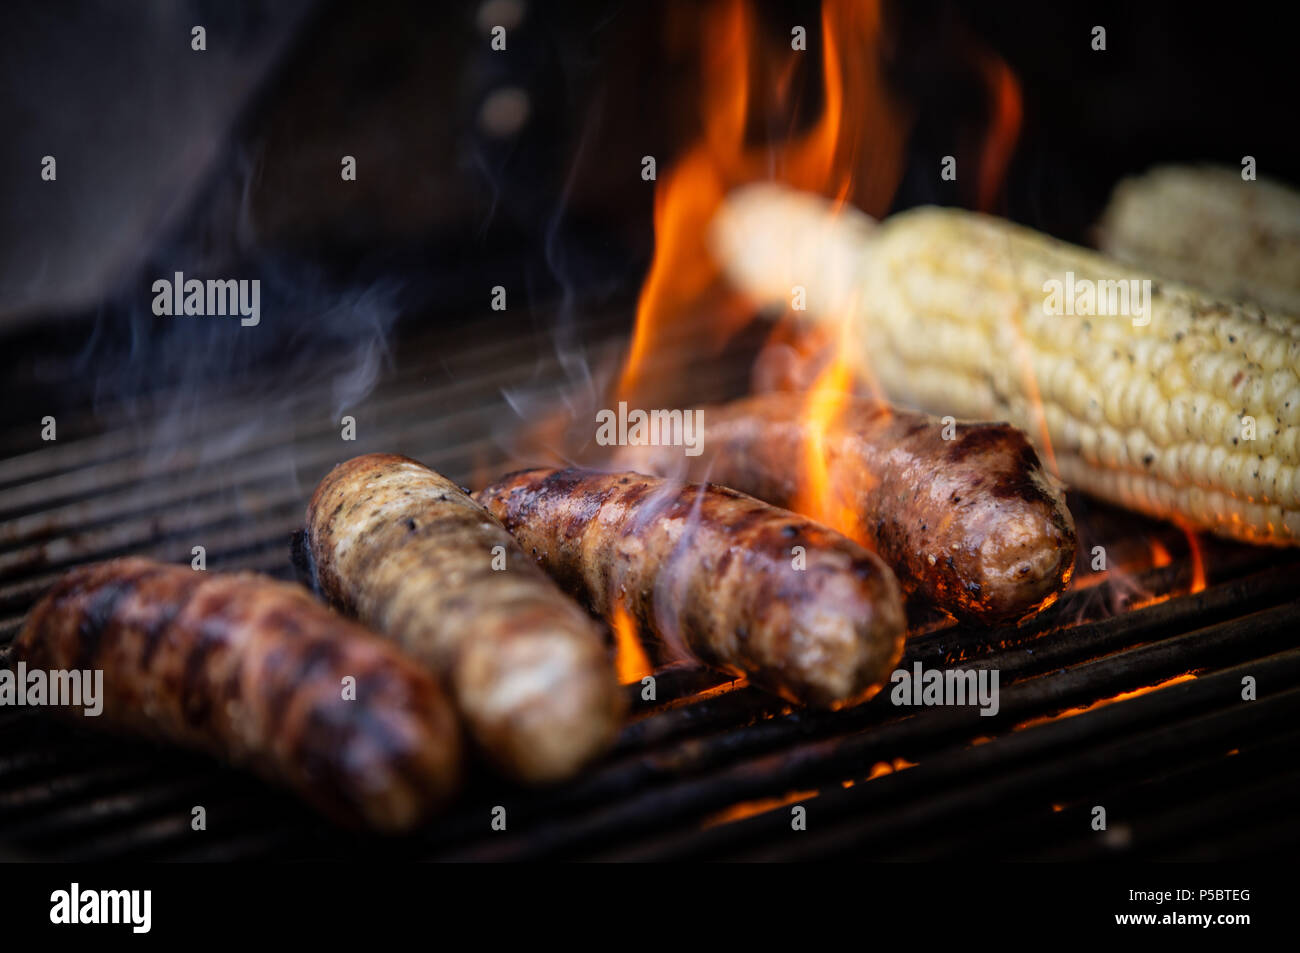 American Backyard BBQ with Sausages and Corn Stock Photo